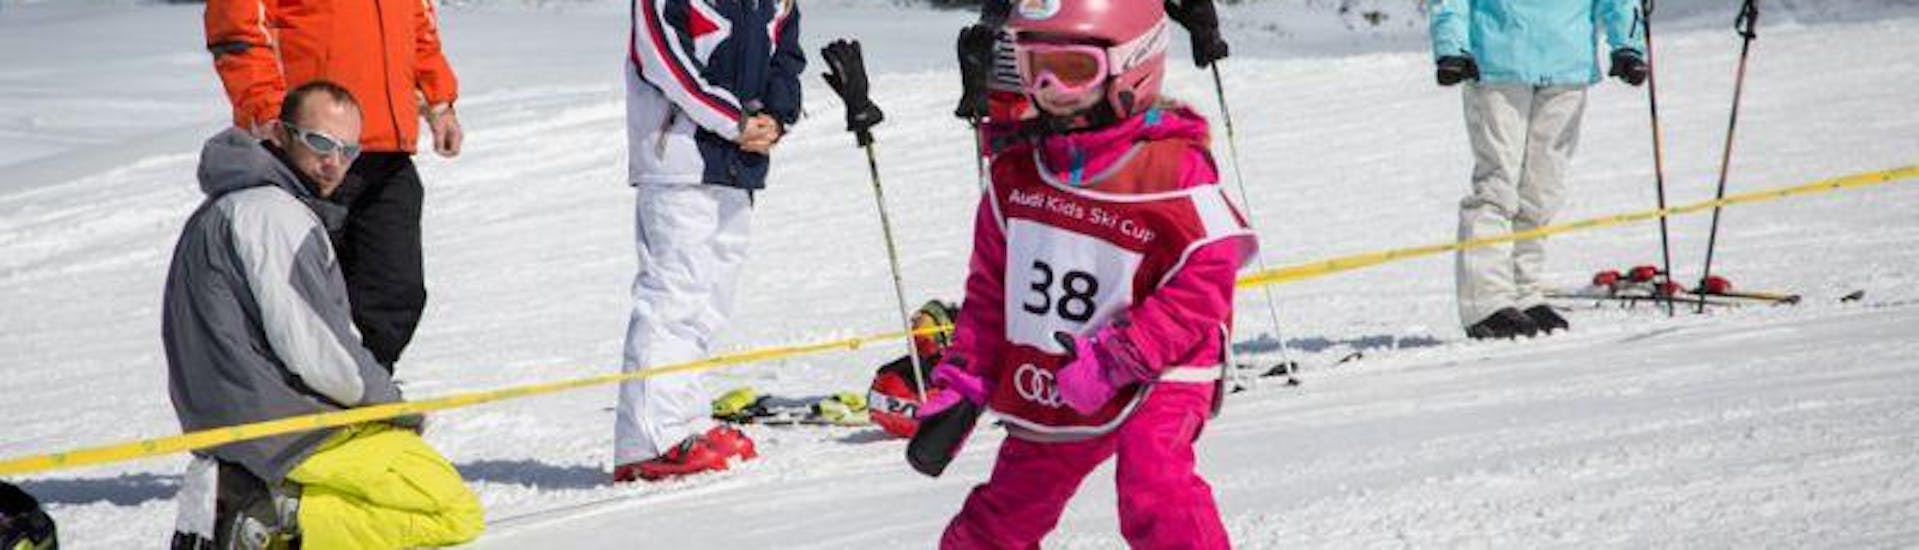 A small child learning how to ski during Kids Ski Lessons (4-12 y.) for First-timers with Skischule Hopl Schladming.